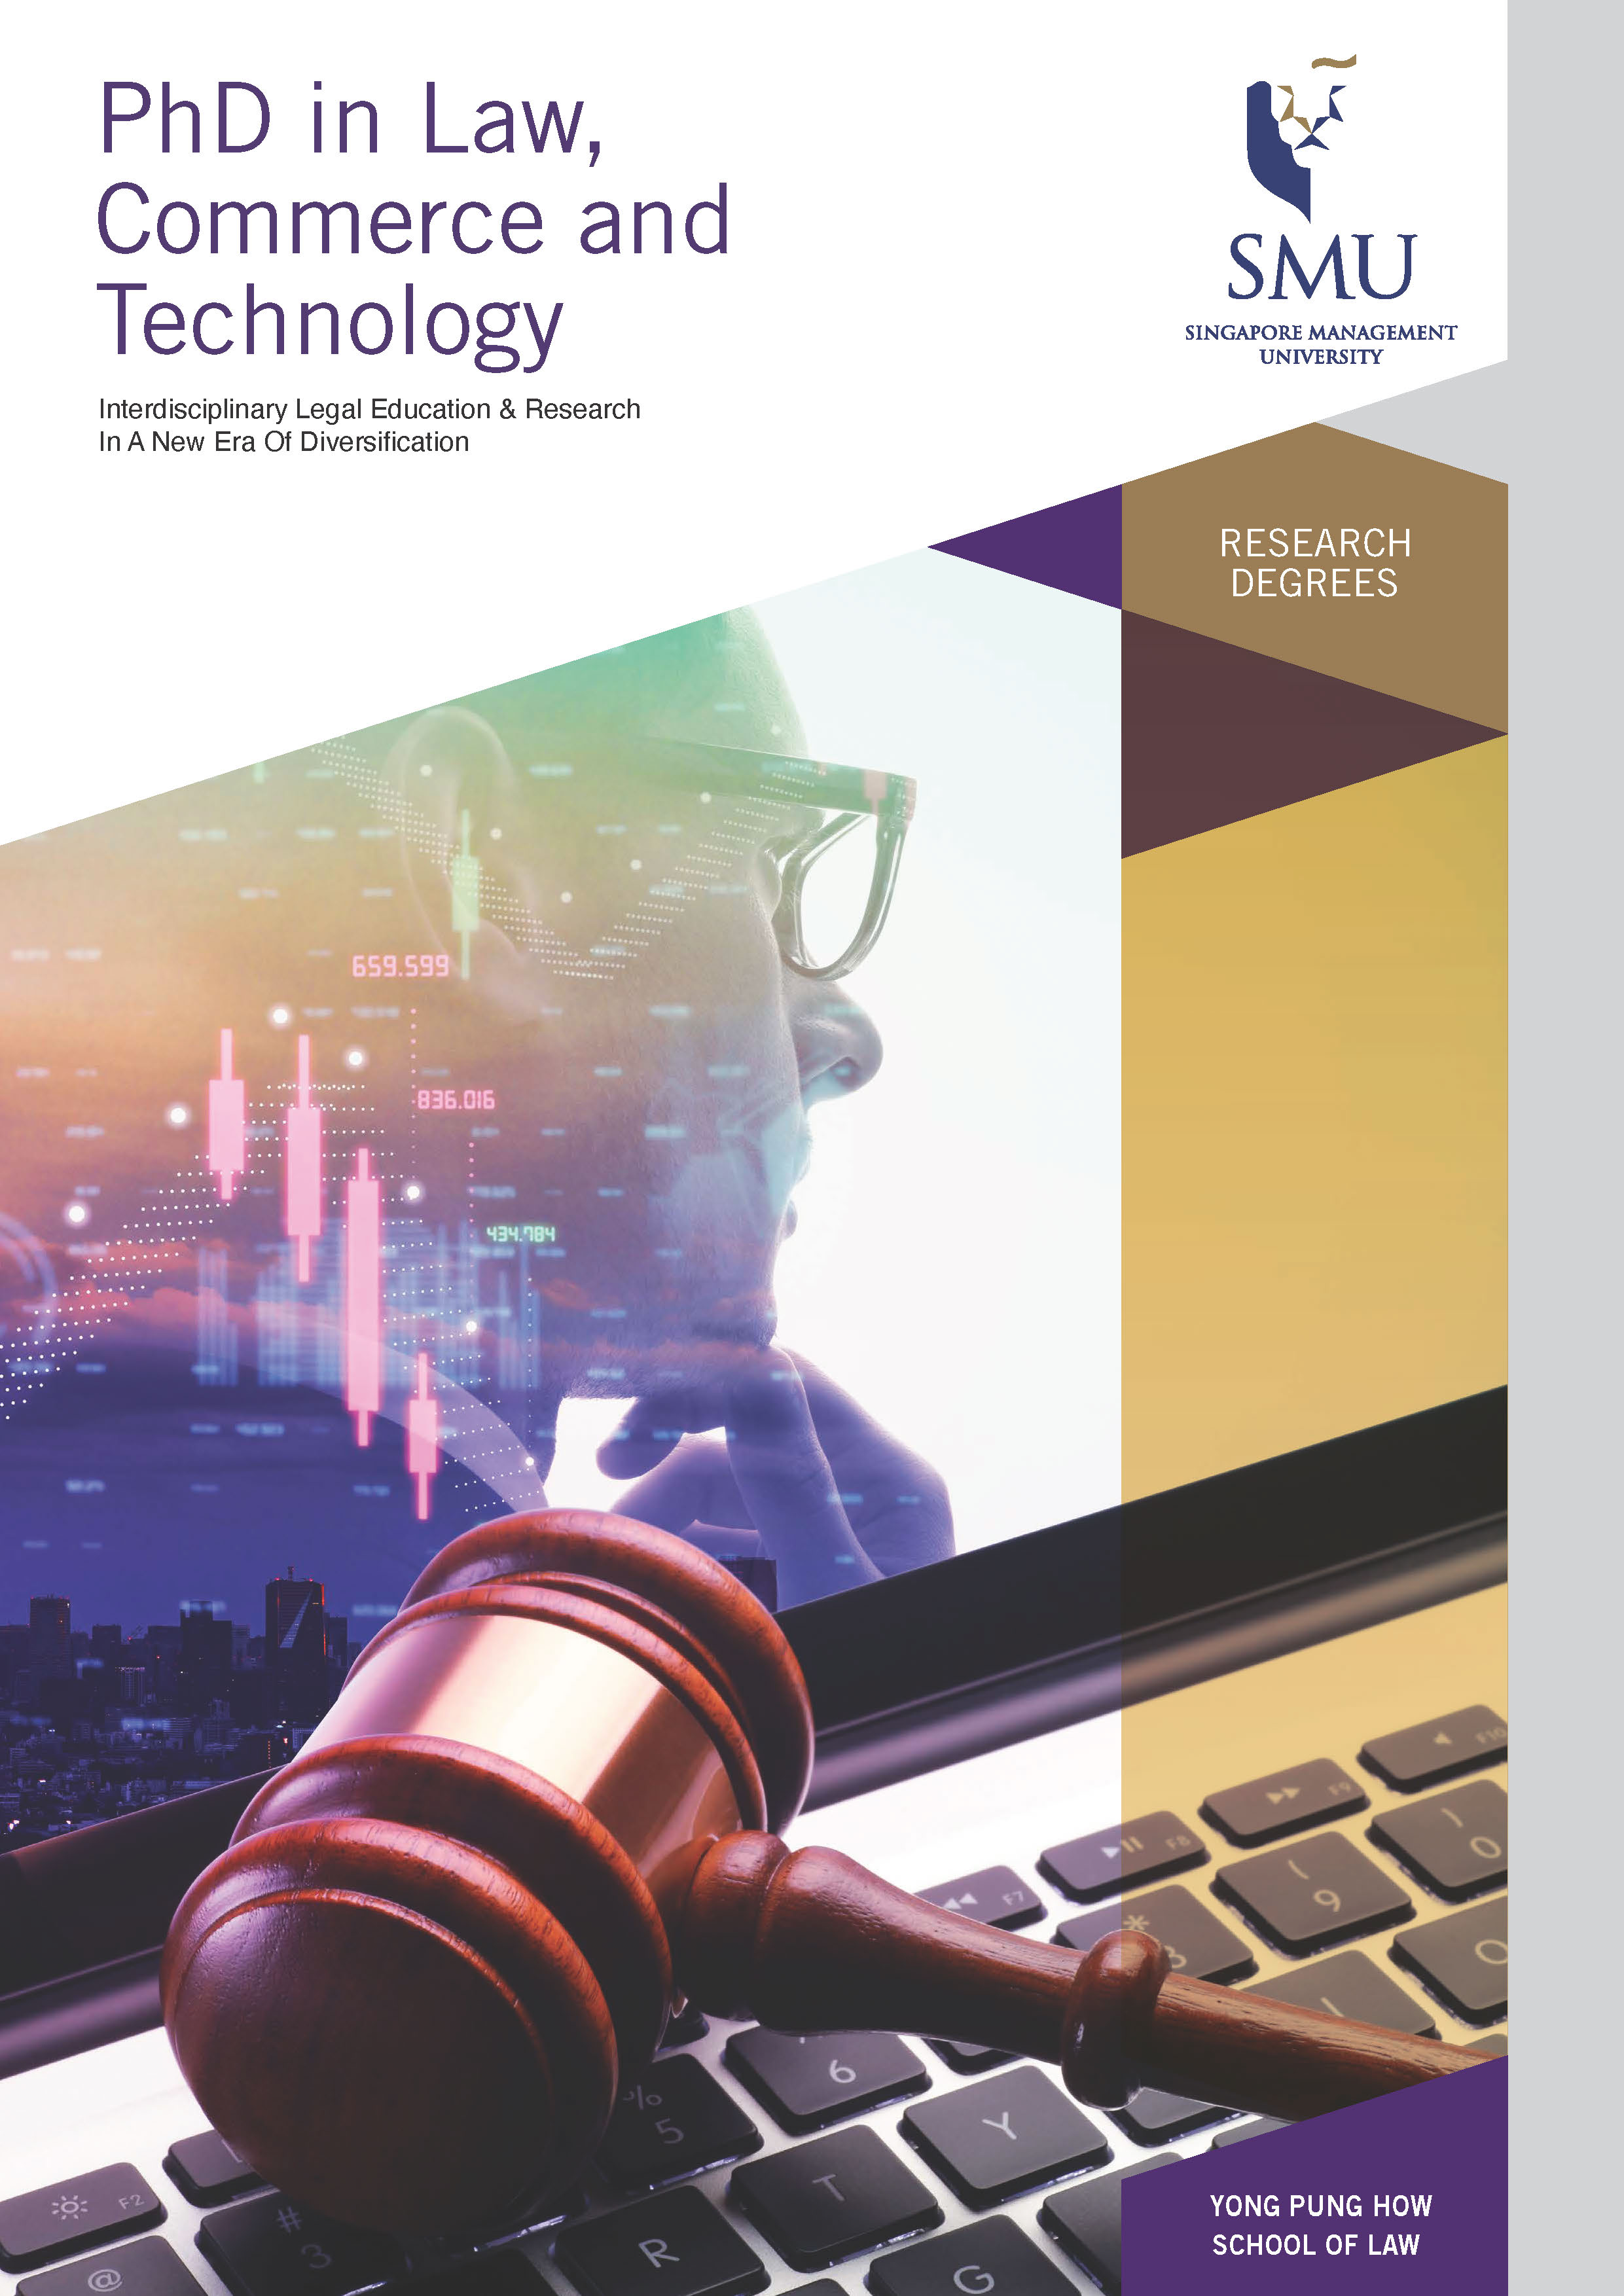 smu phd law commerce technology